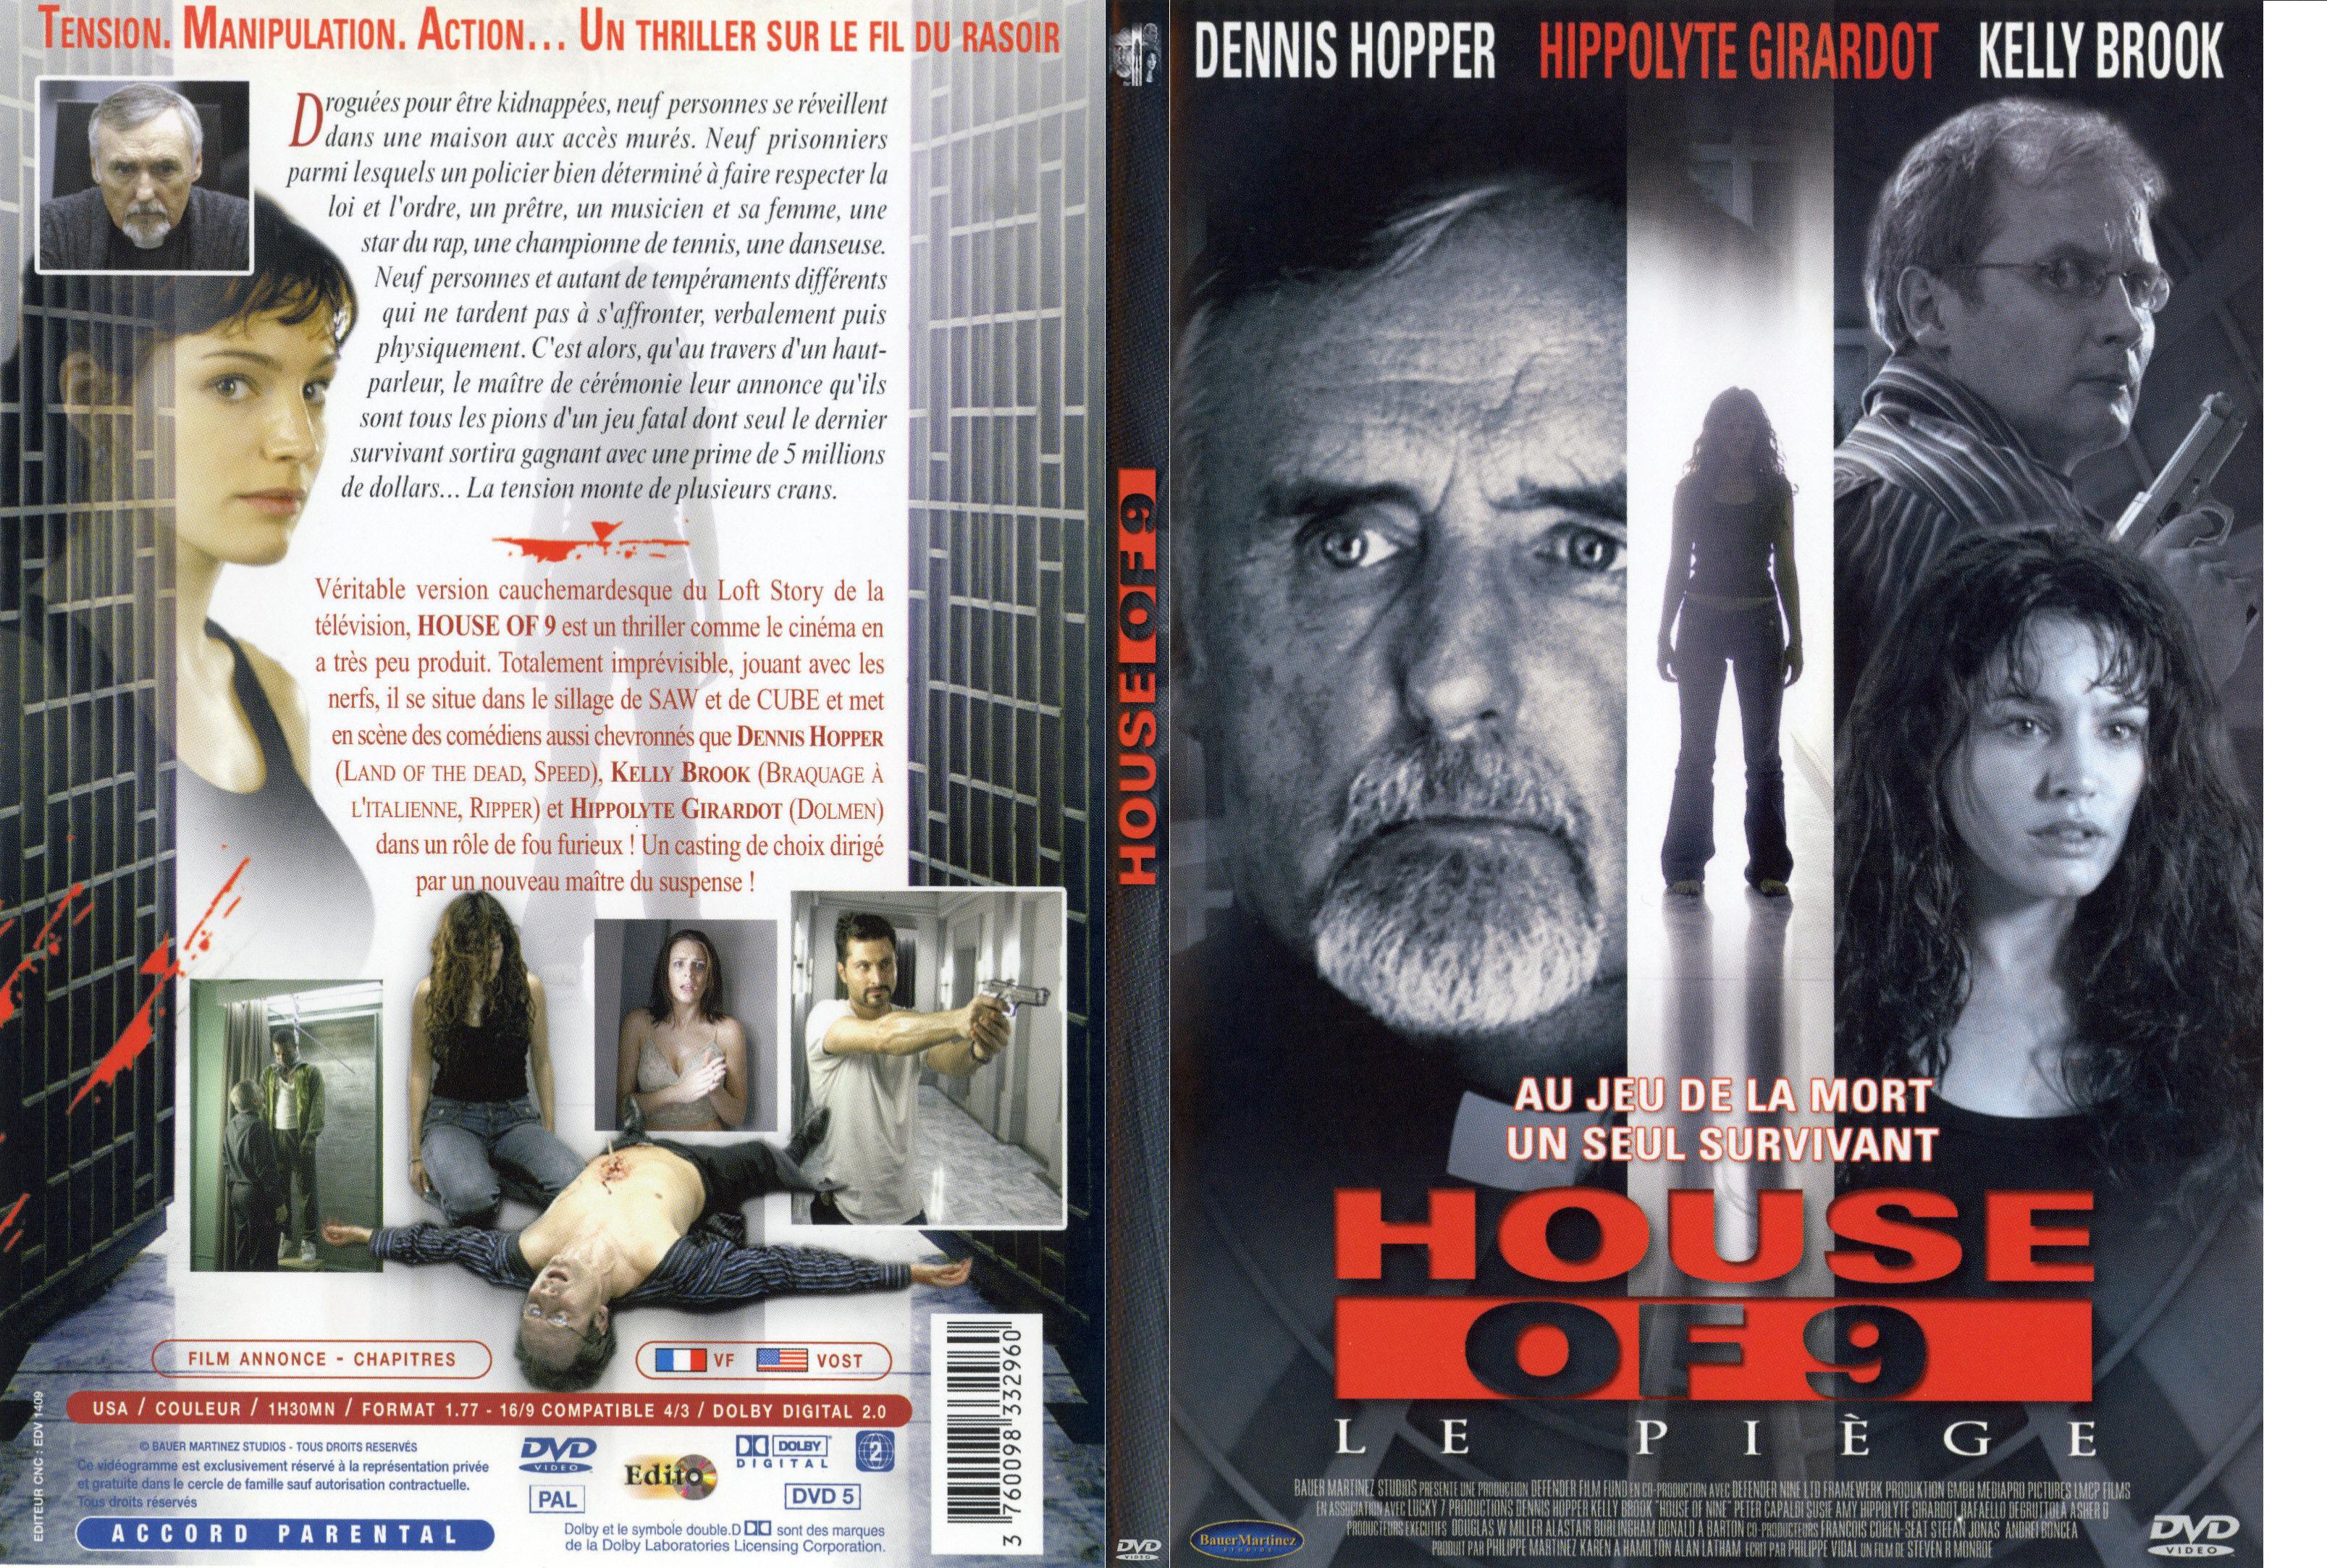 Jaquette DVD House of 9 - SLIM